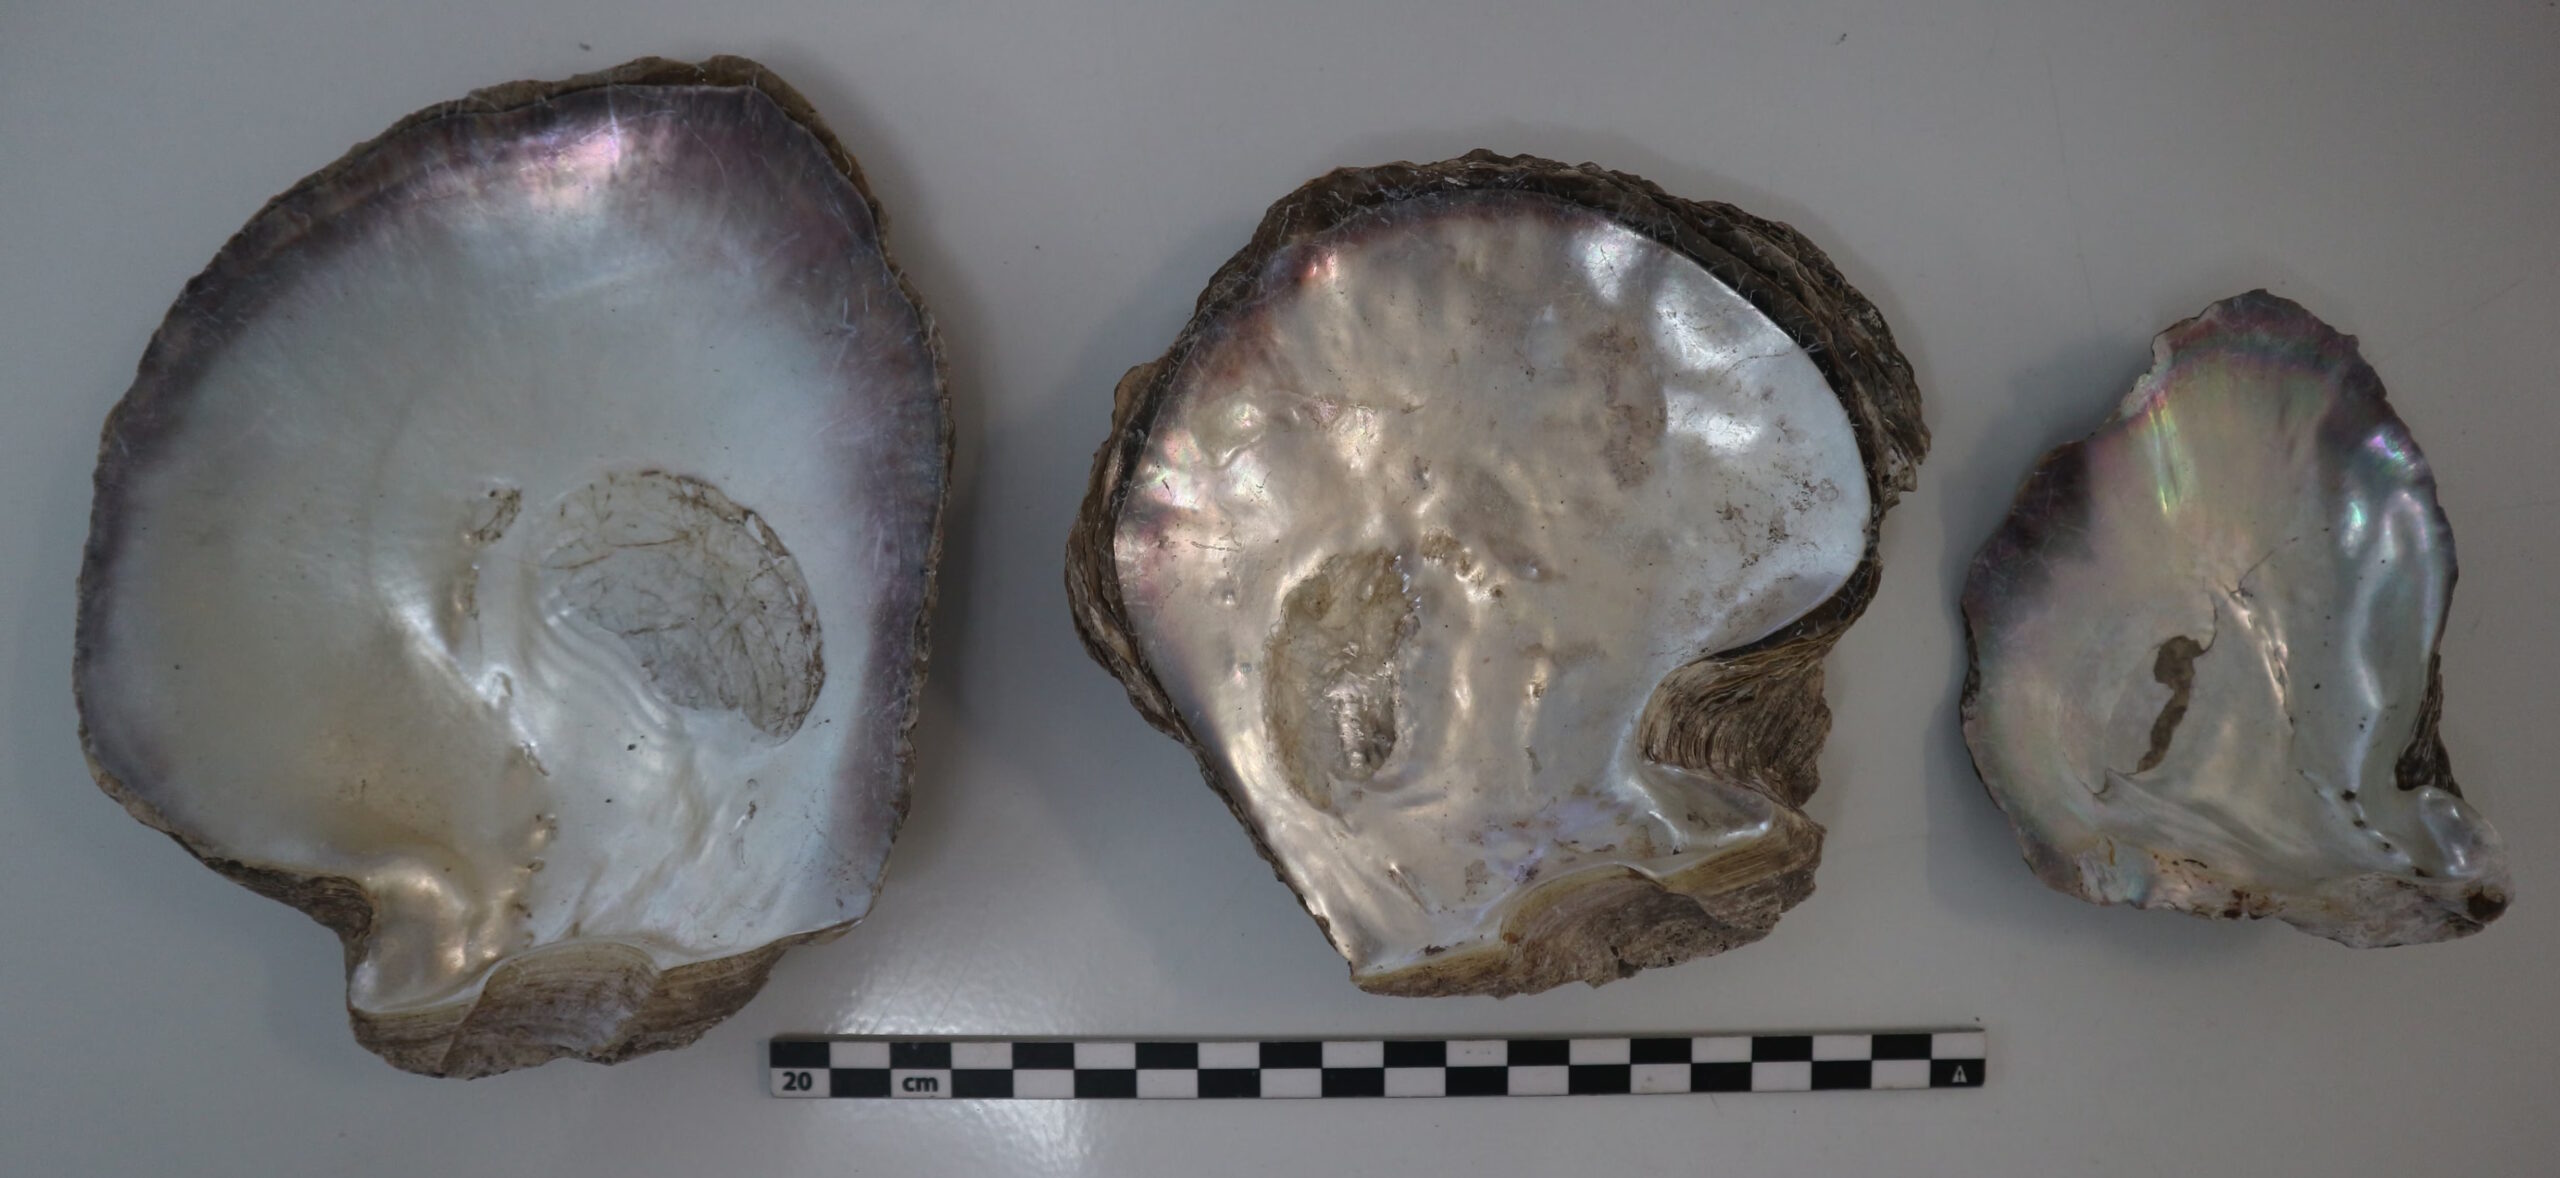 19th c. pearl shells unearthed in French Polynesia